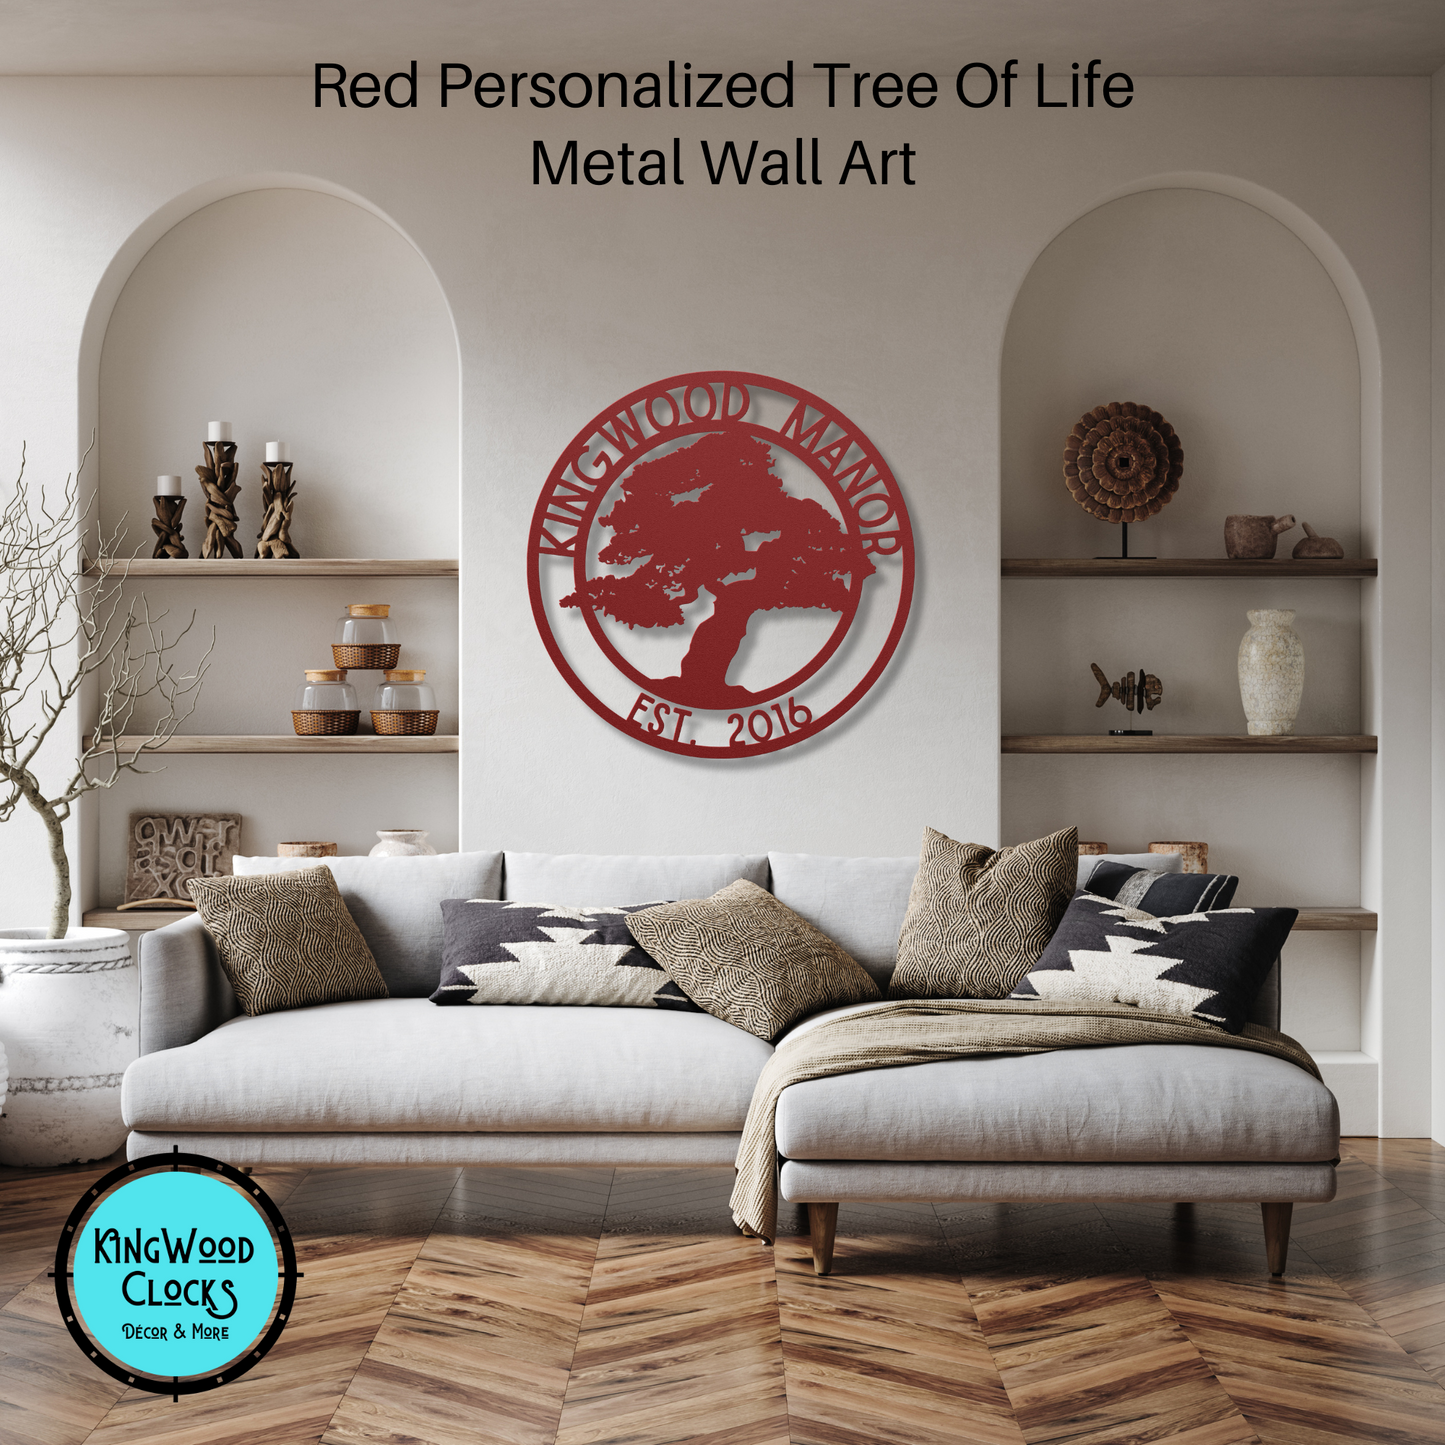 Personalized Tree Of Life Metal Wall Art